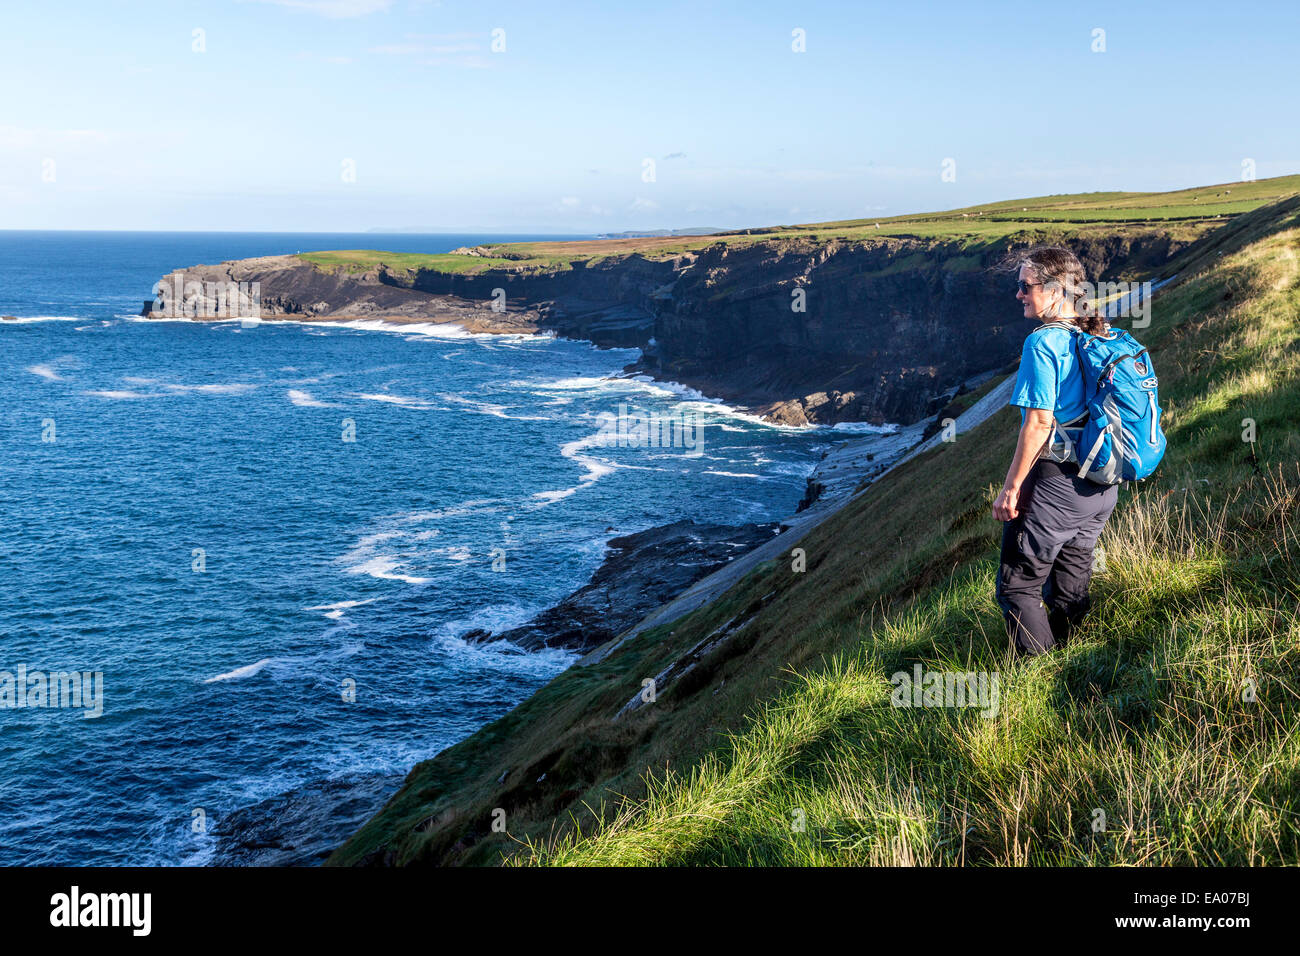 Female hiker on the Loop Head section of coast, County Clare, Ireland Stock Photo